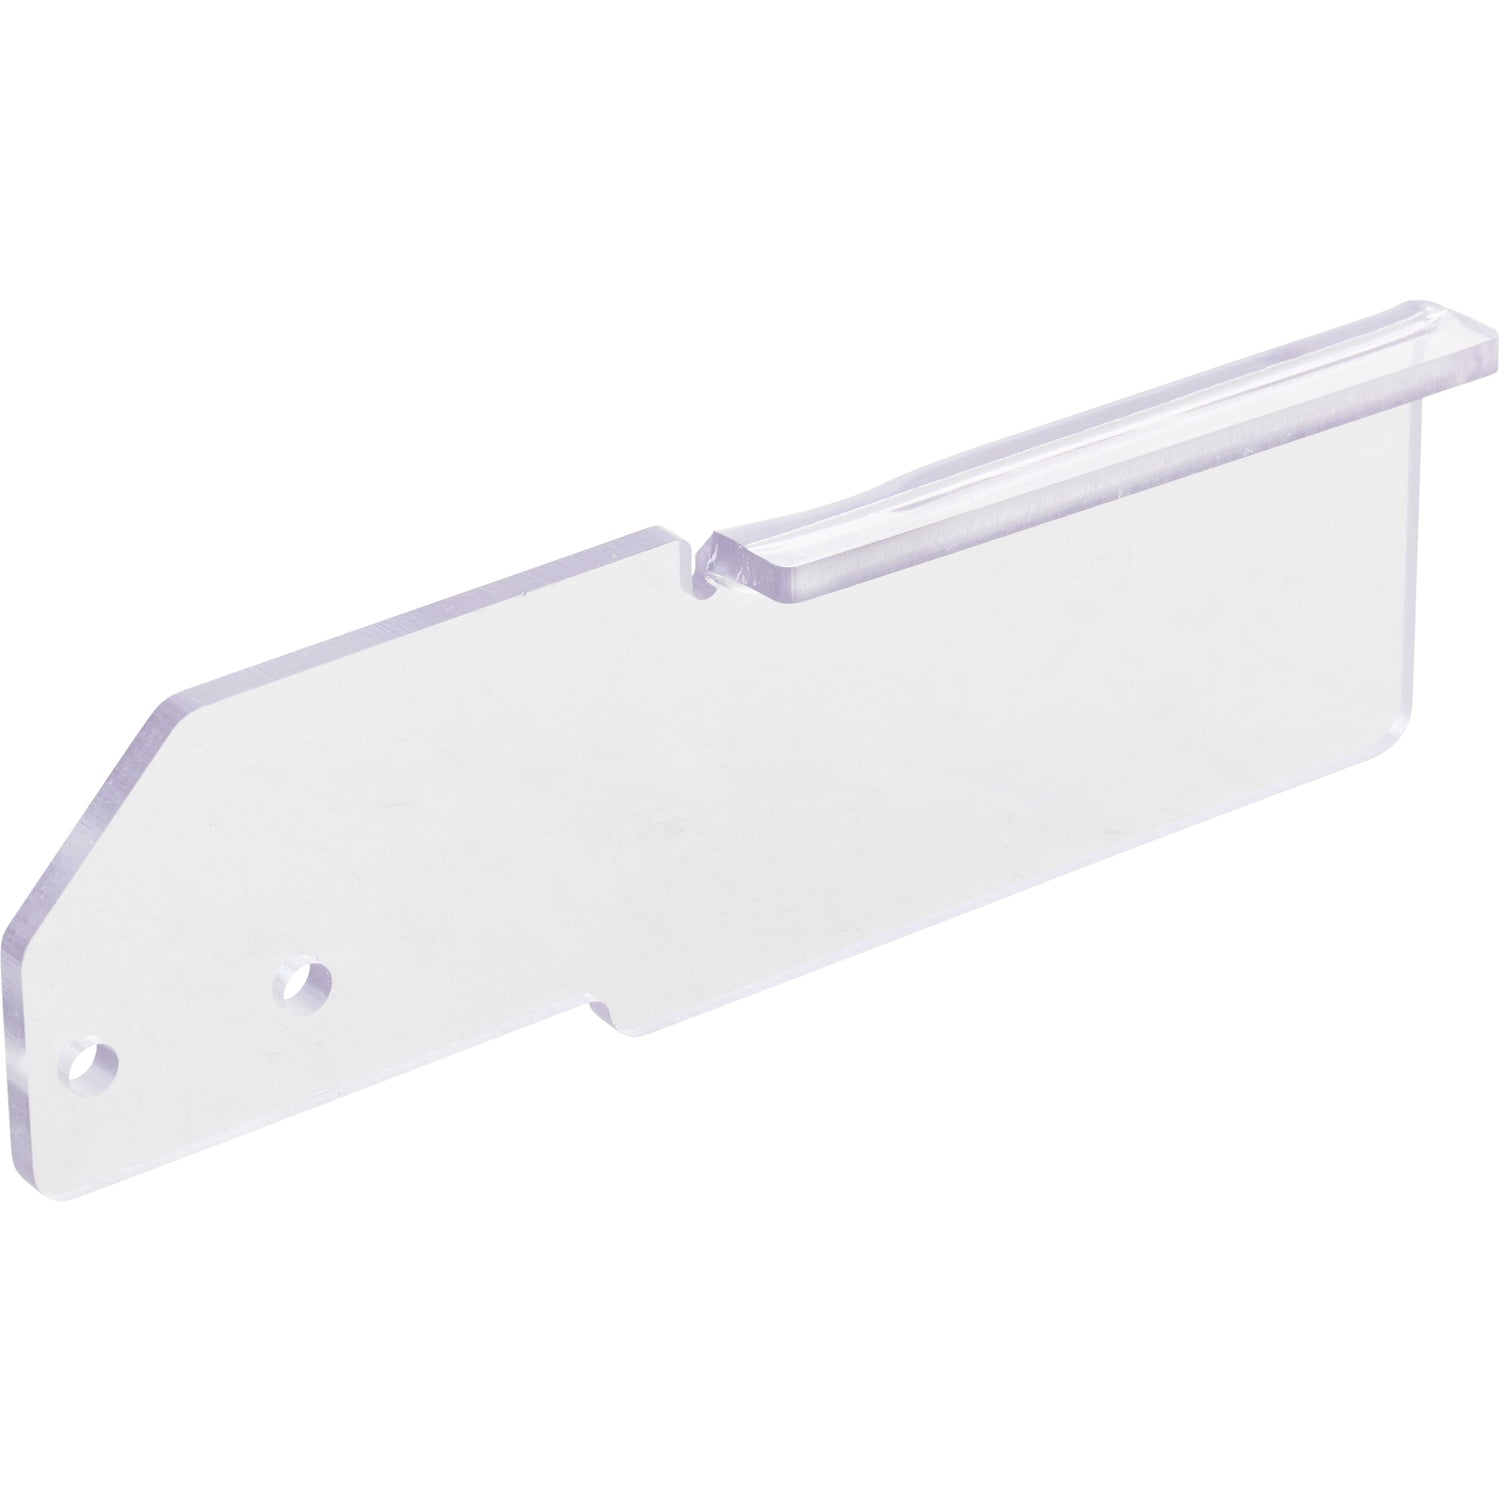 Clear bent polycarbonate guarding shown on a white background.